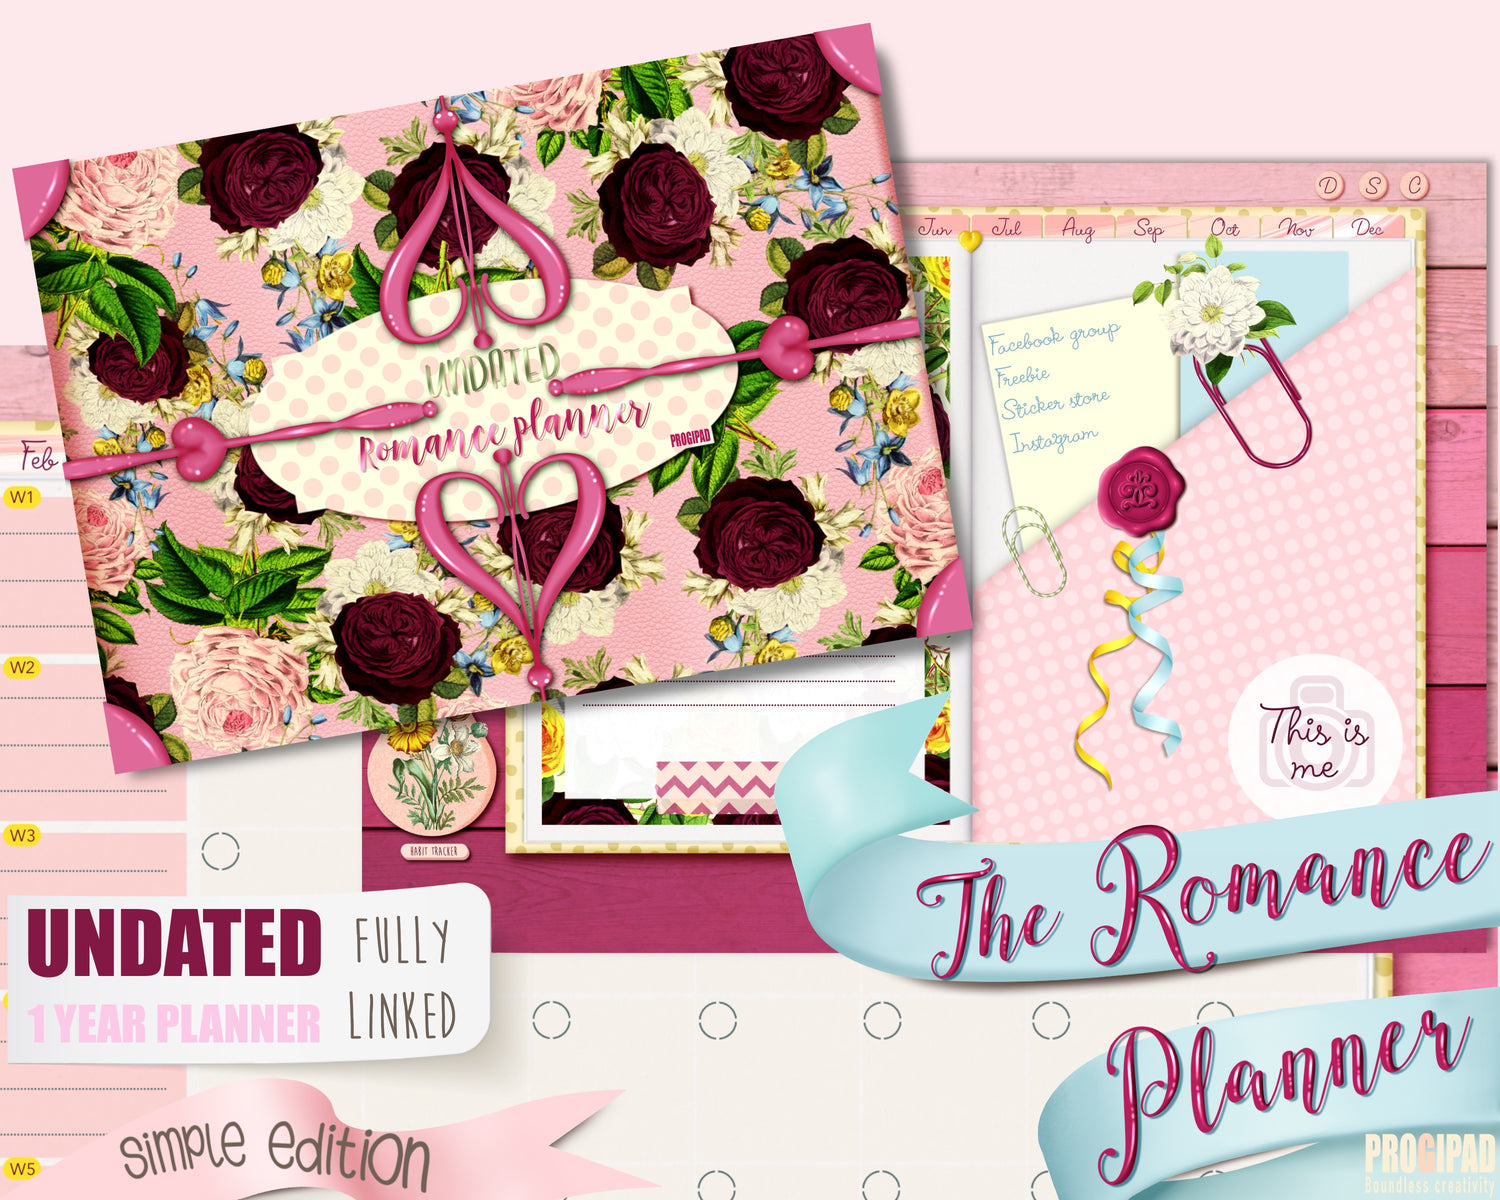 The Romance planner, (simple edition)